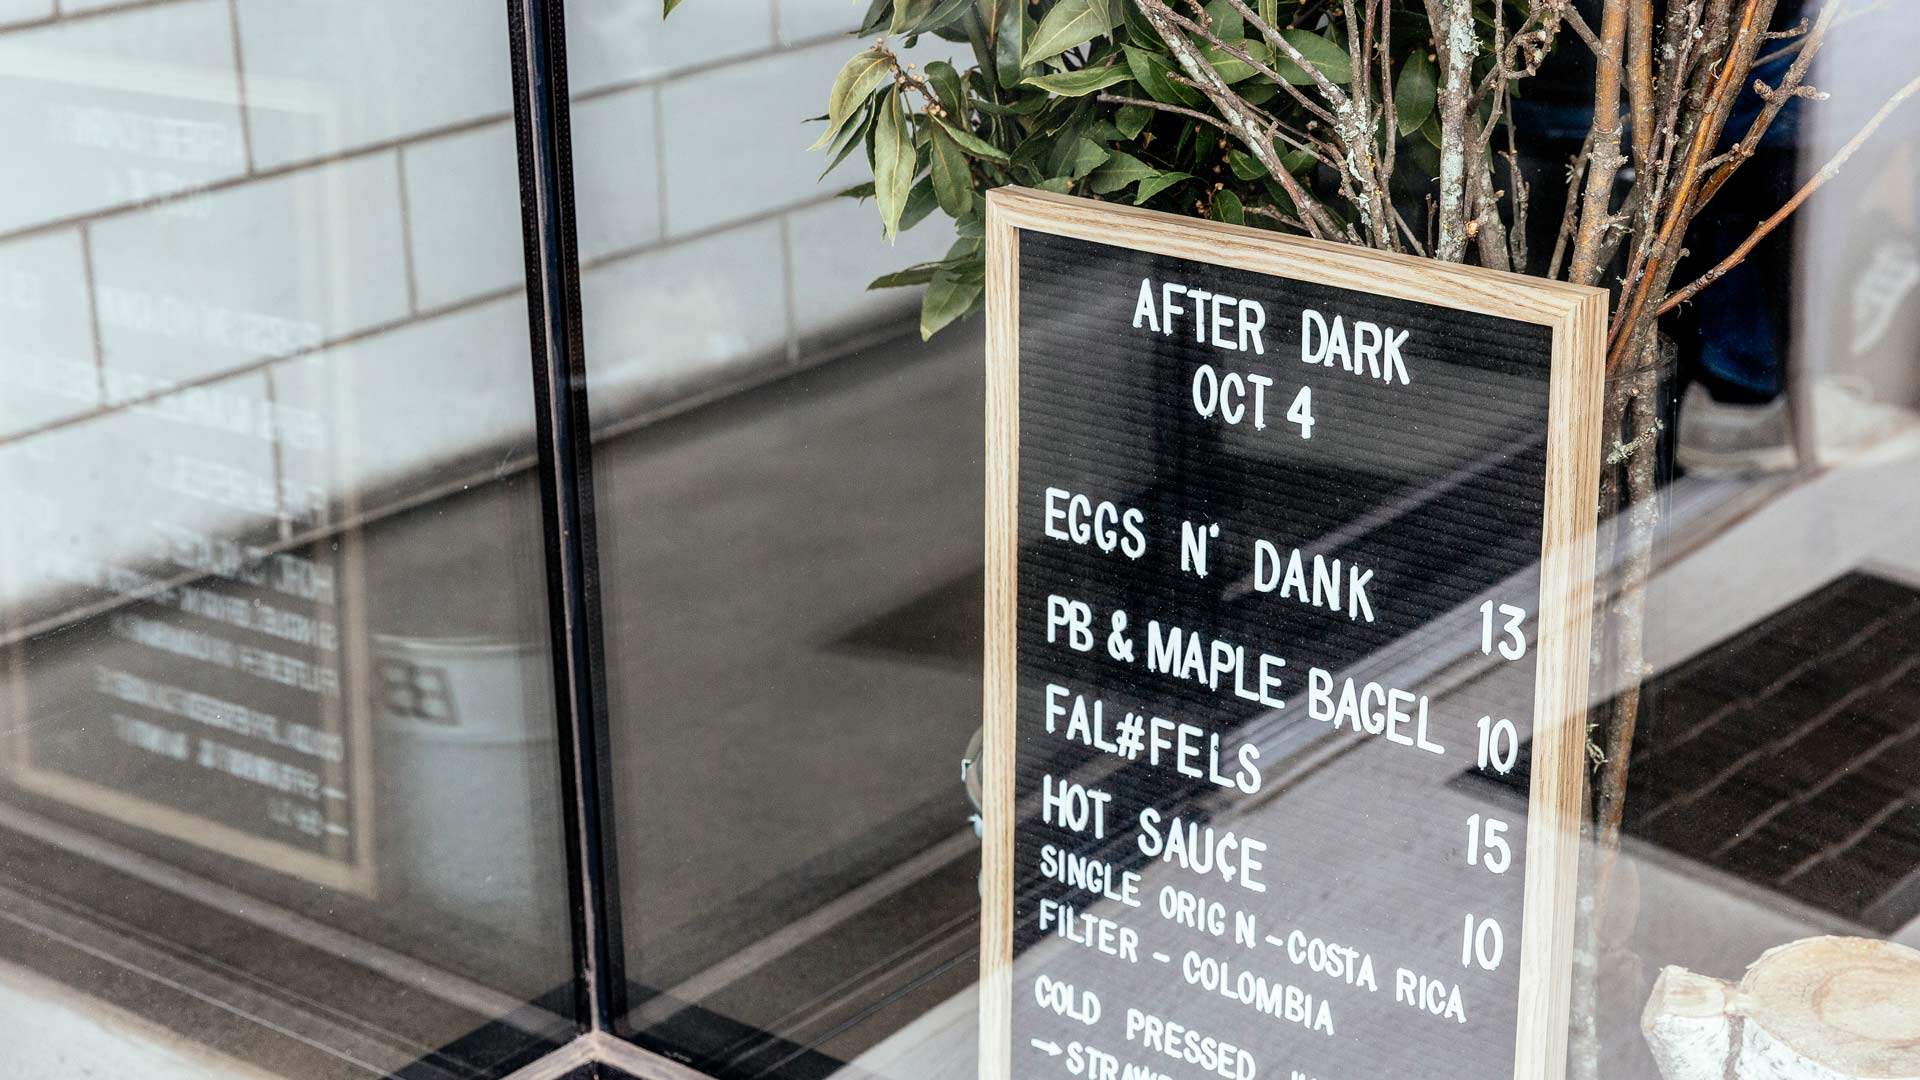 Bambam Eatery Is Cheltenham's New Solar-Powered Cafe with a Mostly Vegan Menu